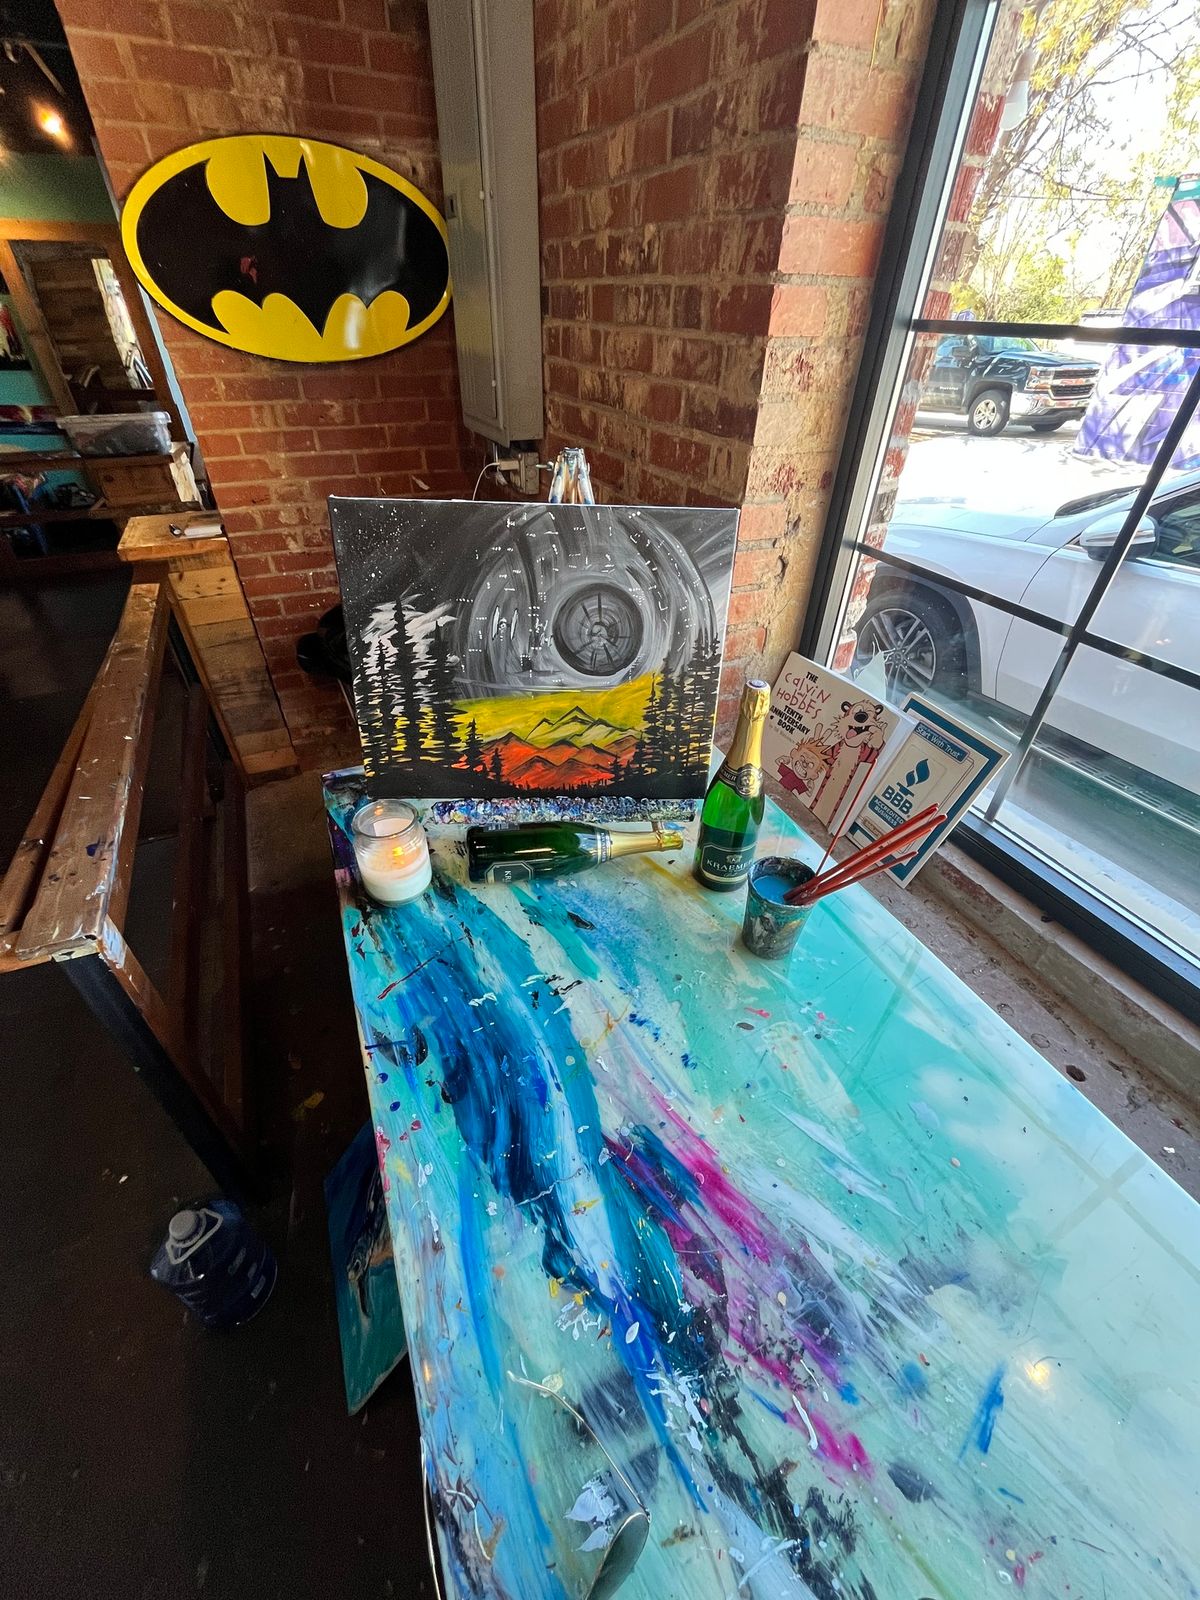 $1 Mimosas Star Wars Paint Party "May the 4th be with you" 